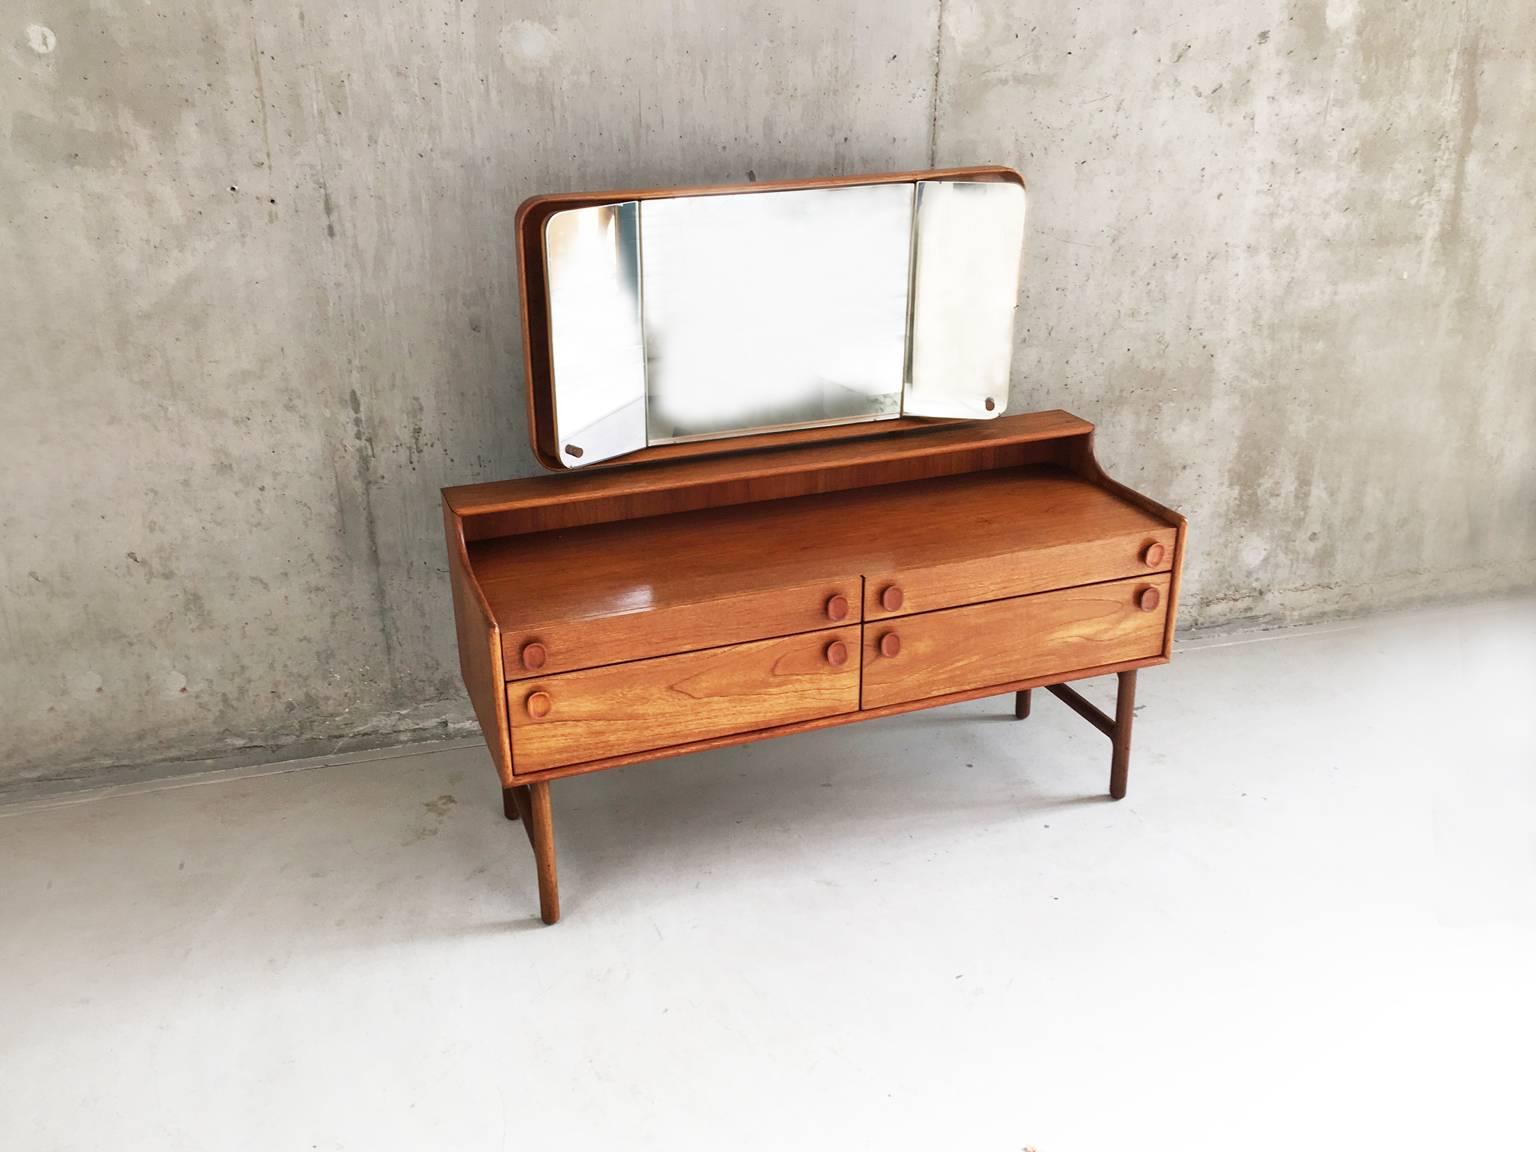 An exceptional dressing table made by the well-known antique furniture manufacturers Meredew. Having been in business since the 19th century, they embraced modernism in the 1950s and produced furniture that epitomized the period.

The piece